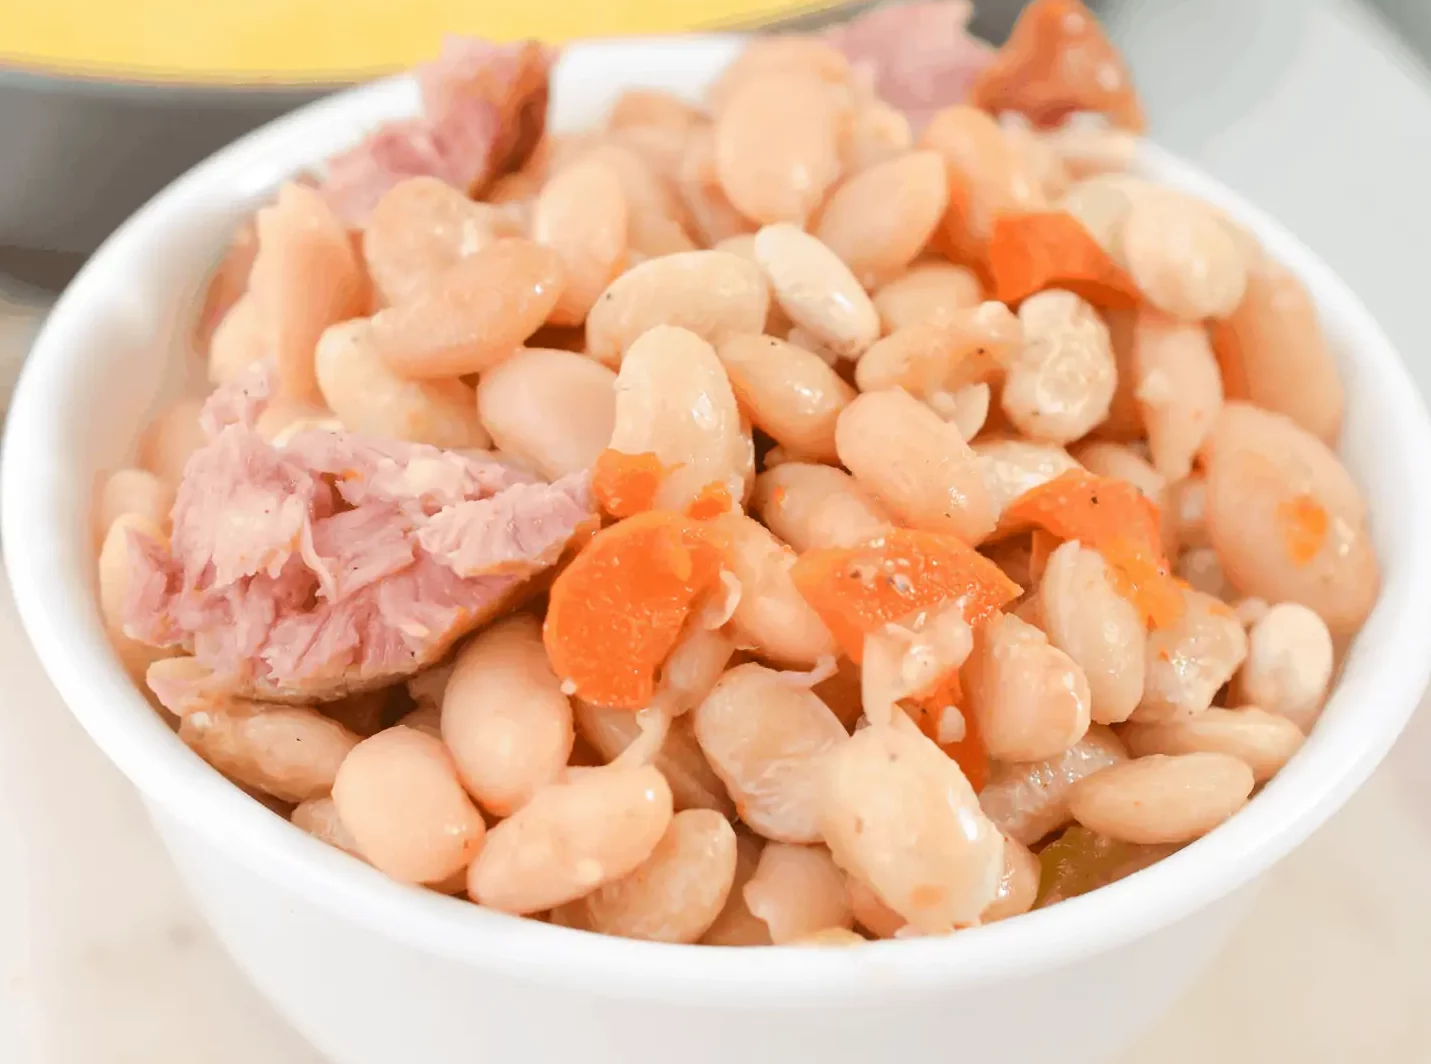 cannellini beans substitute, substitution for cannellini beans, substitute for cannellini beans, cannellini bean substitute, substitute cannellini beans, cannellini beans sub